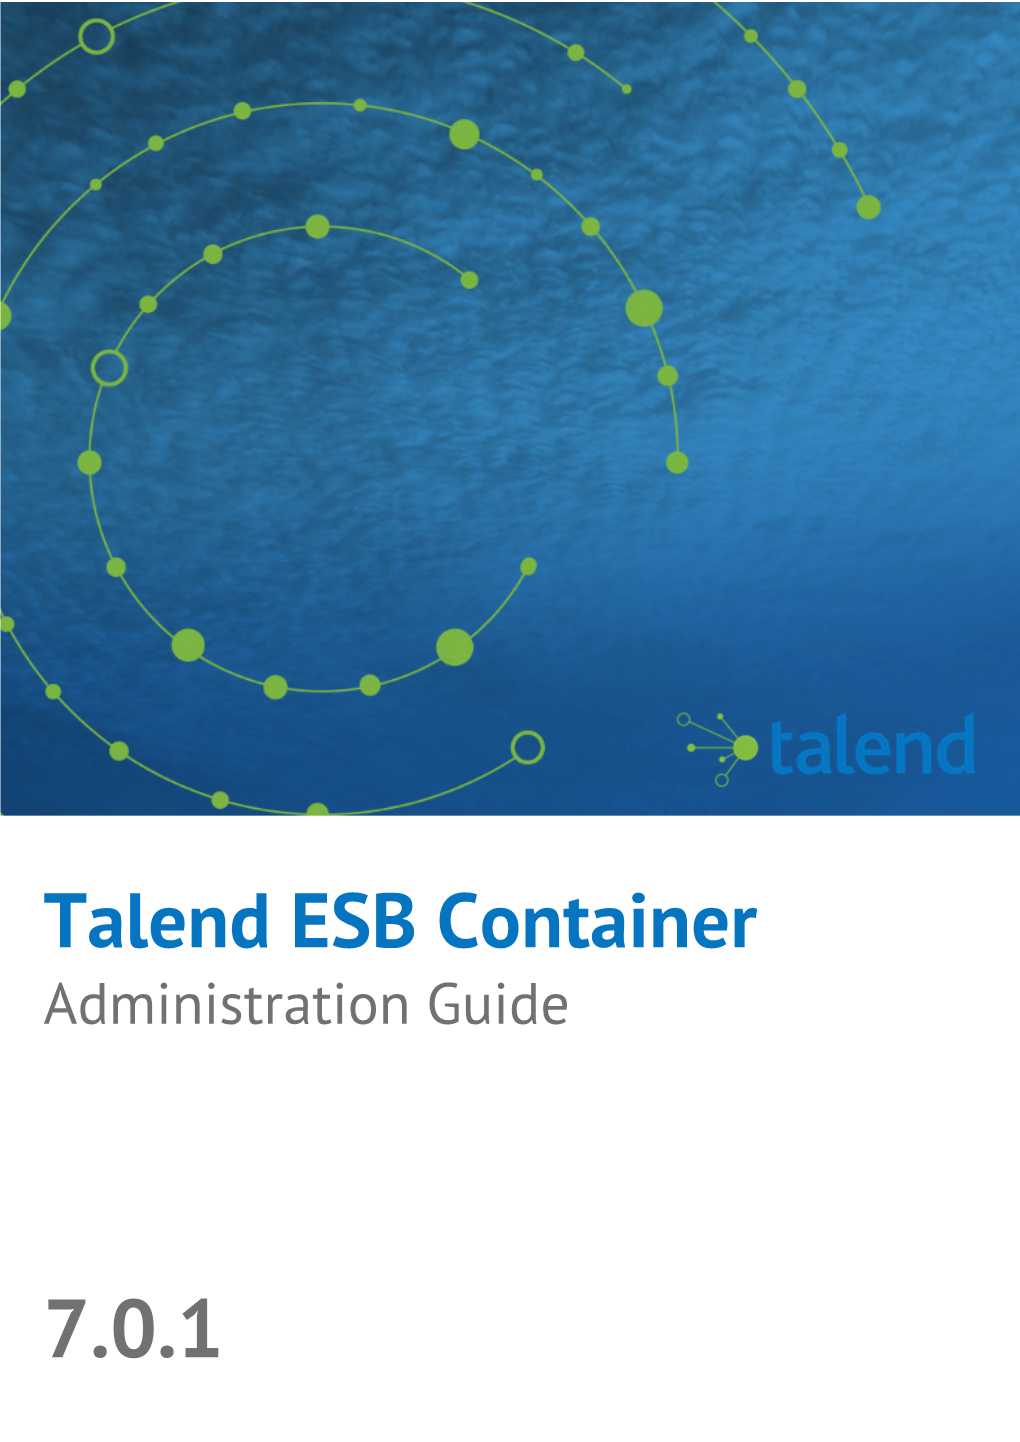 Talend ESB Container Administration Guide